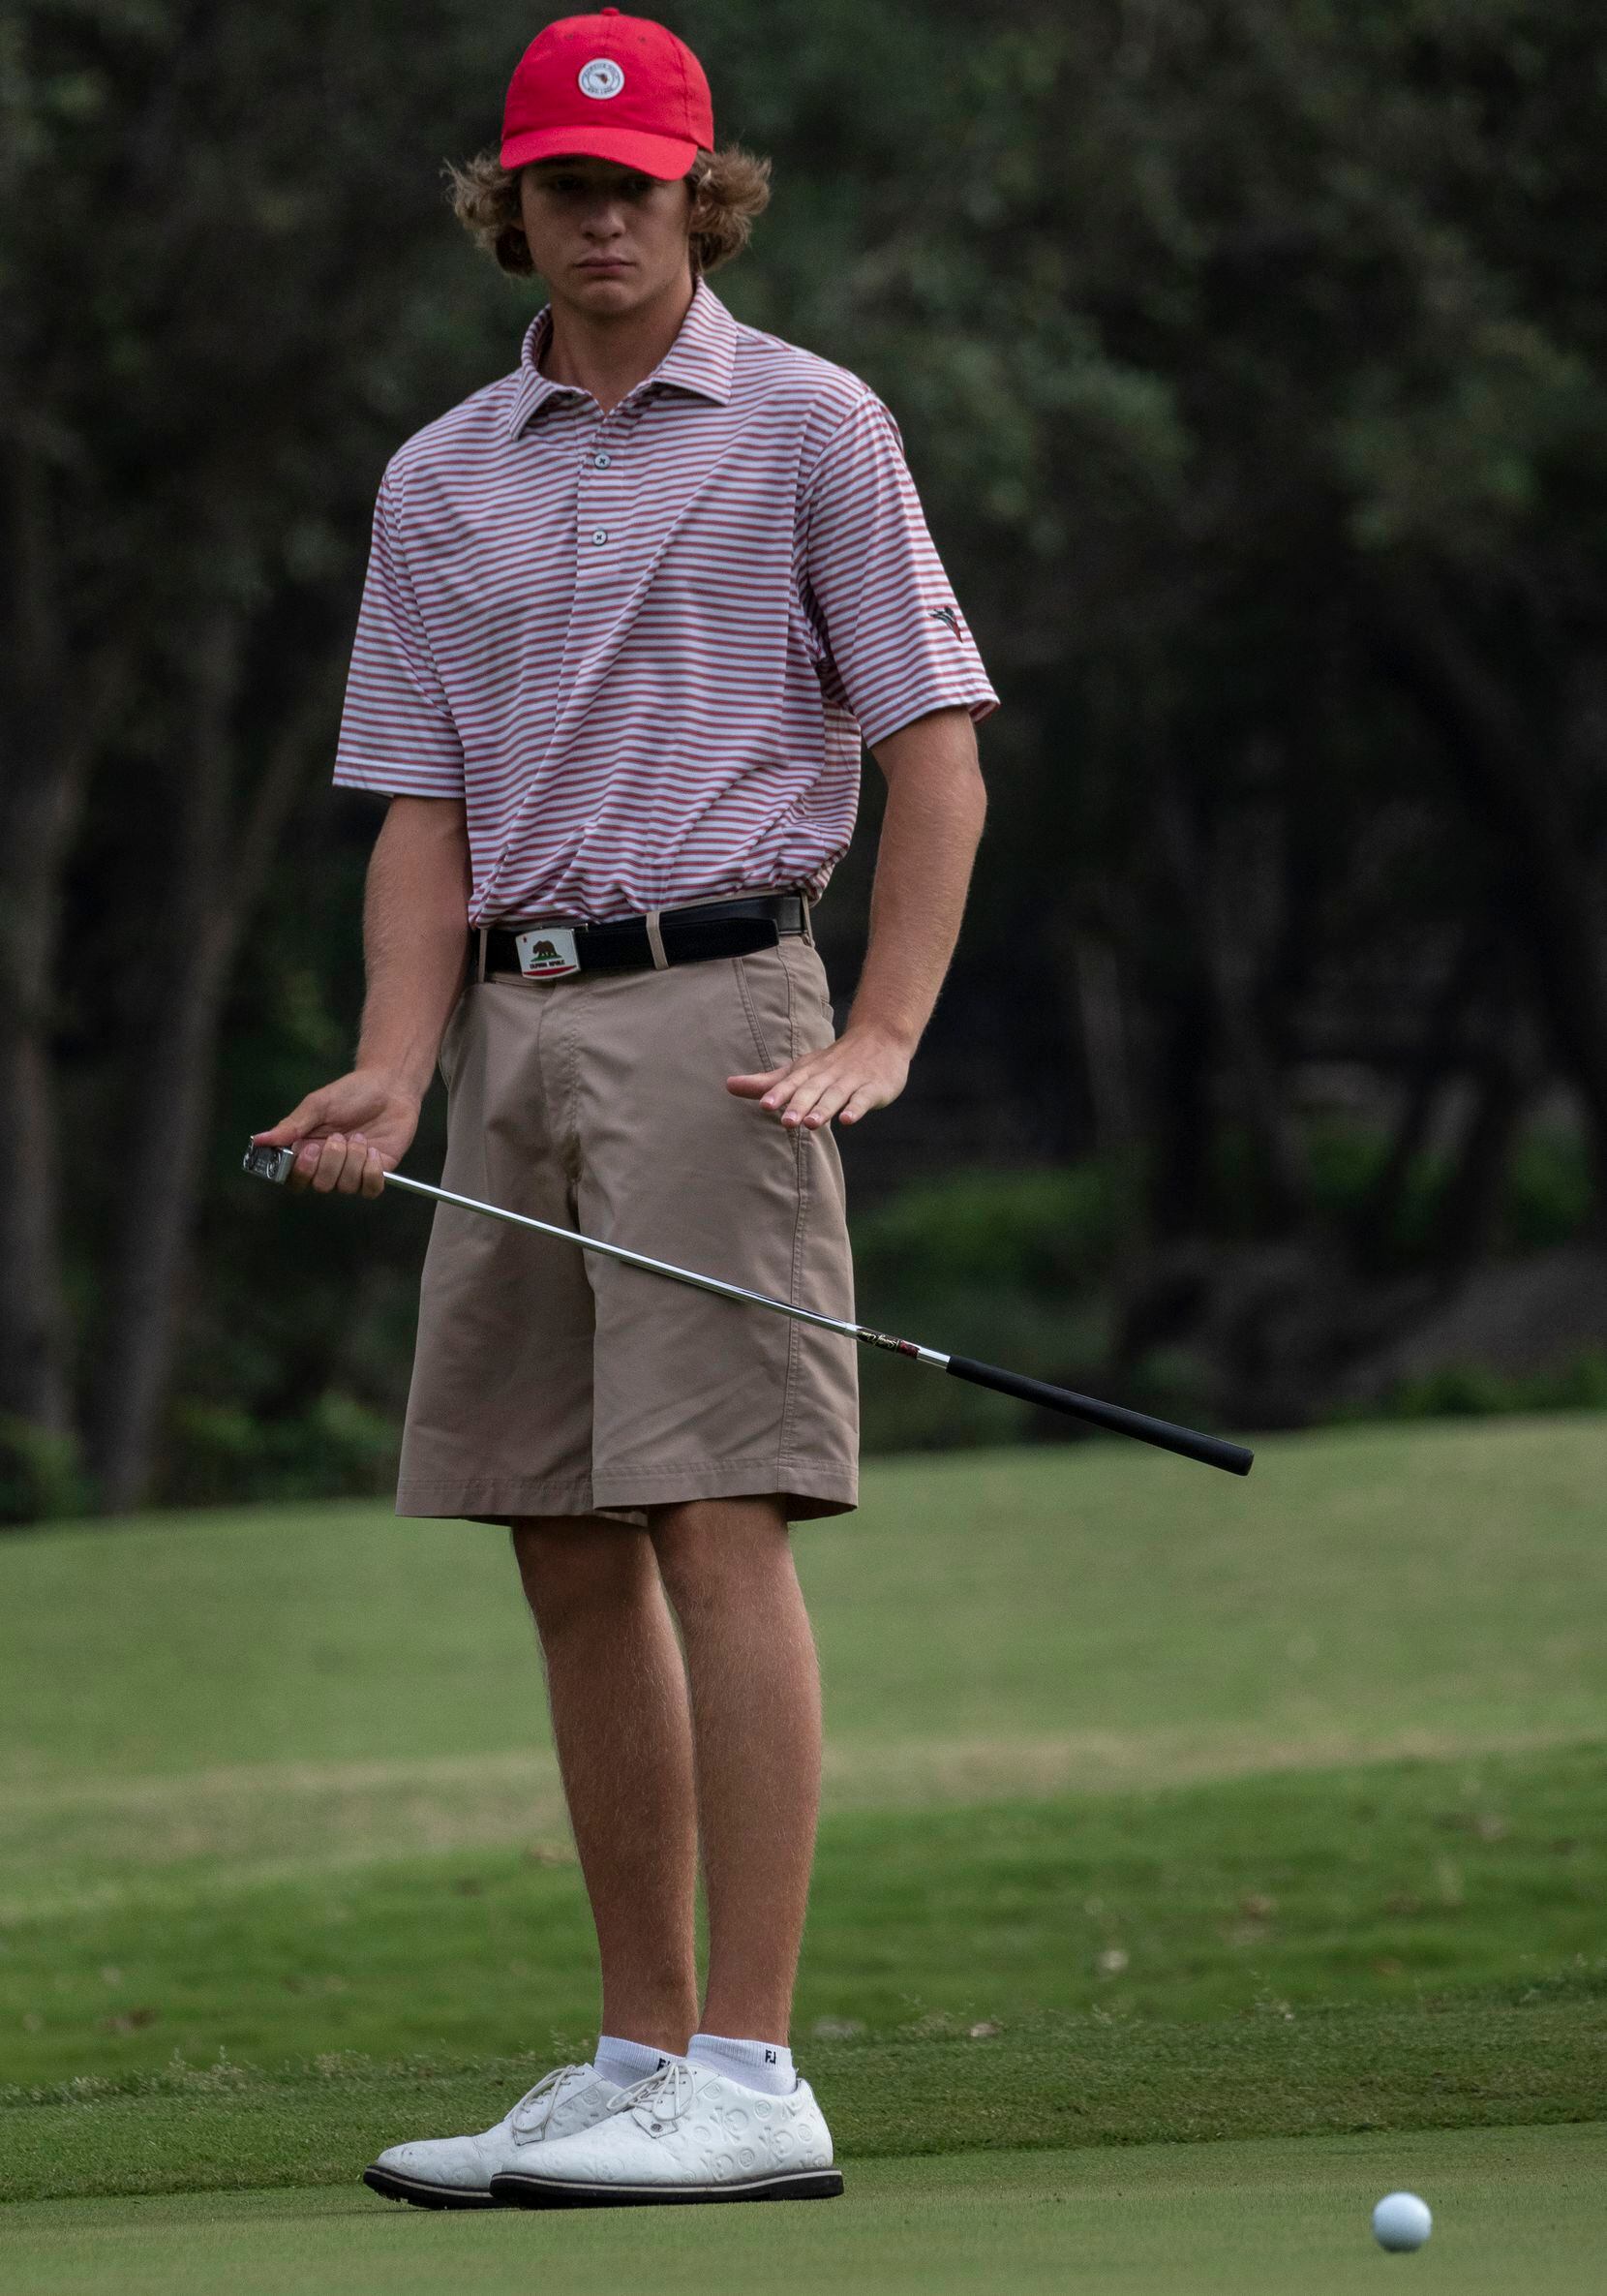 Flower Mound Marcus, Sam Pampling, watches a putt on the no1. green during the first round...